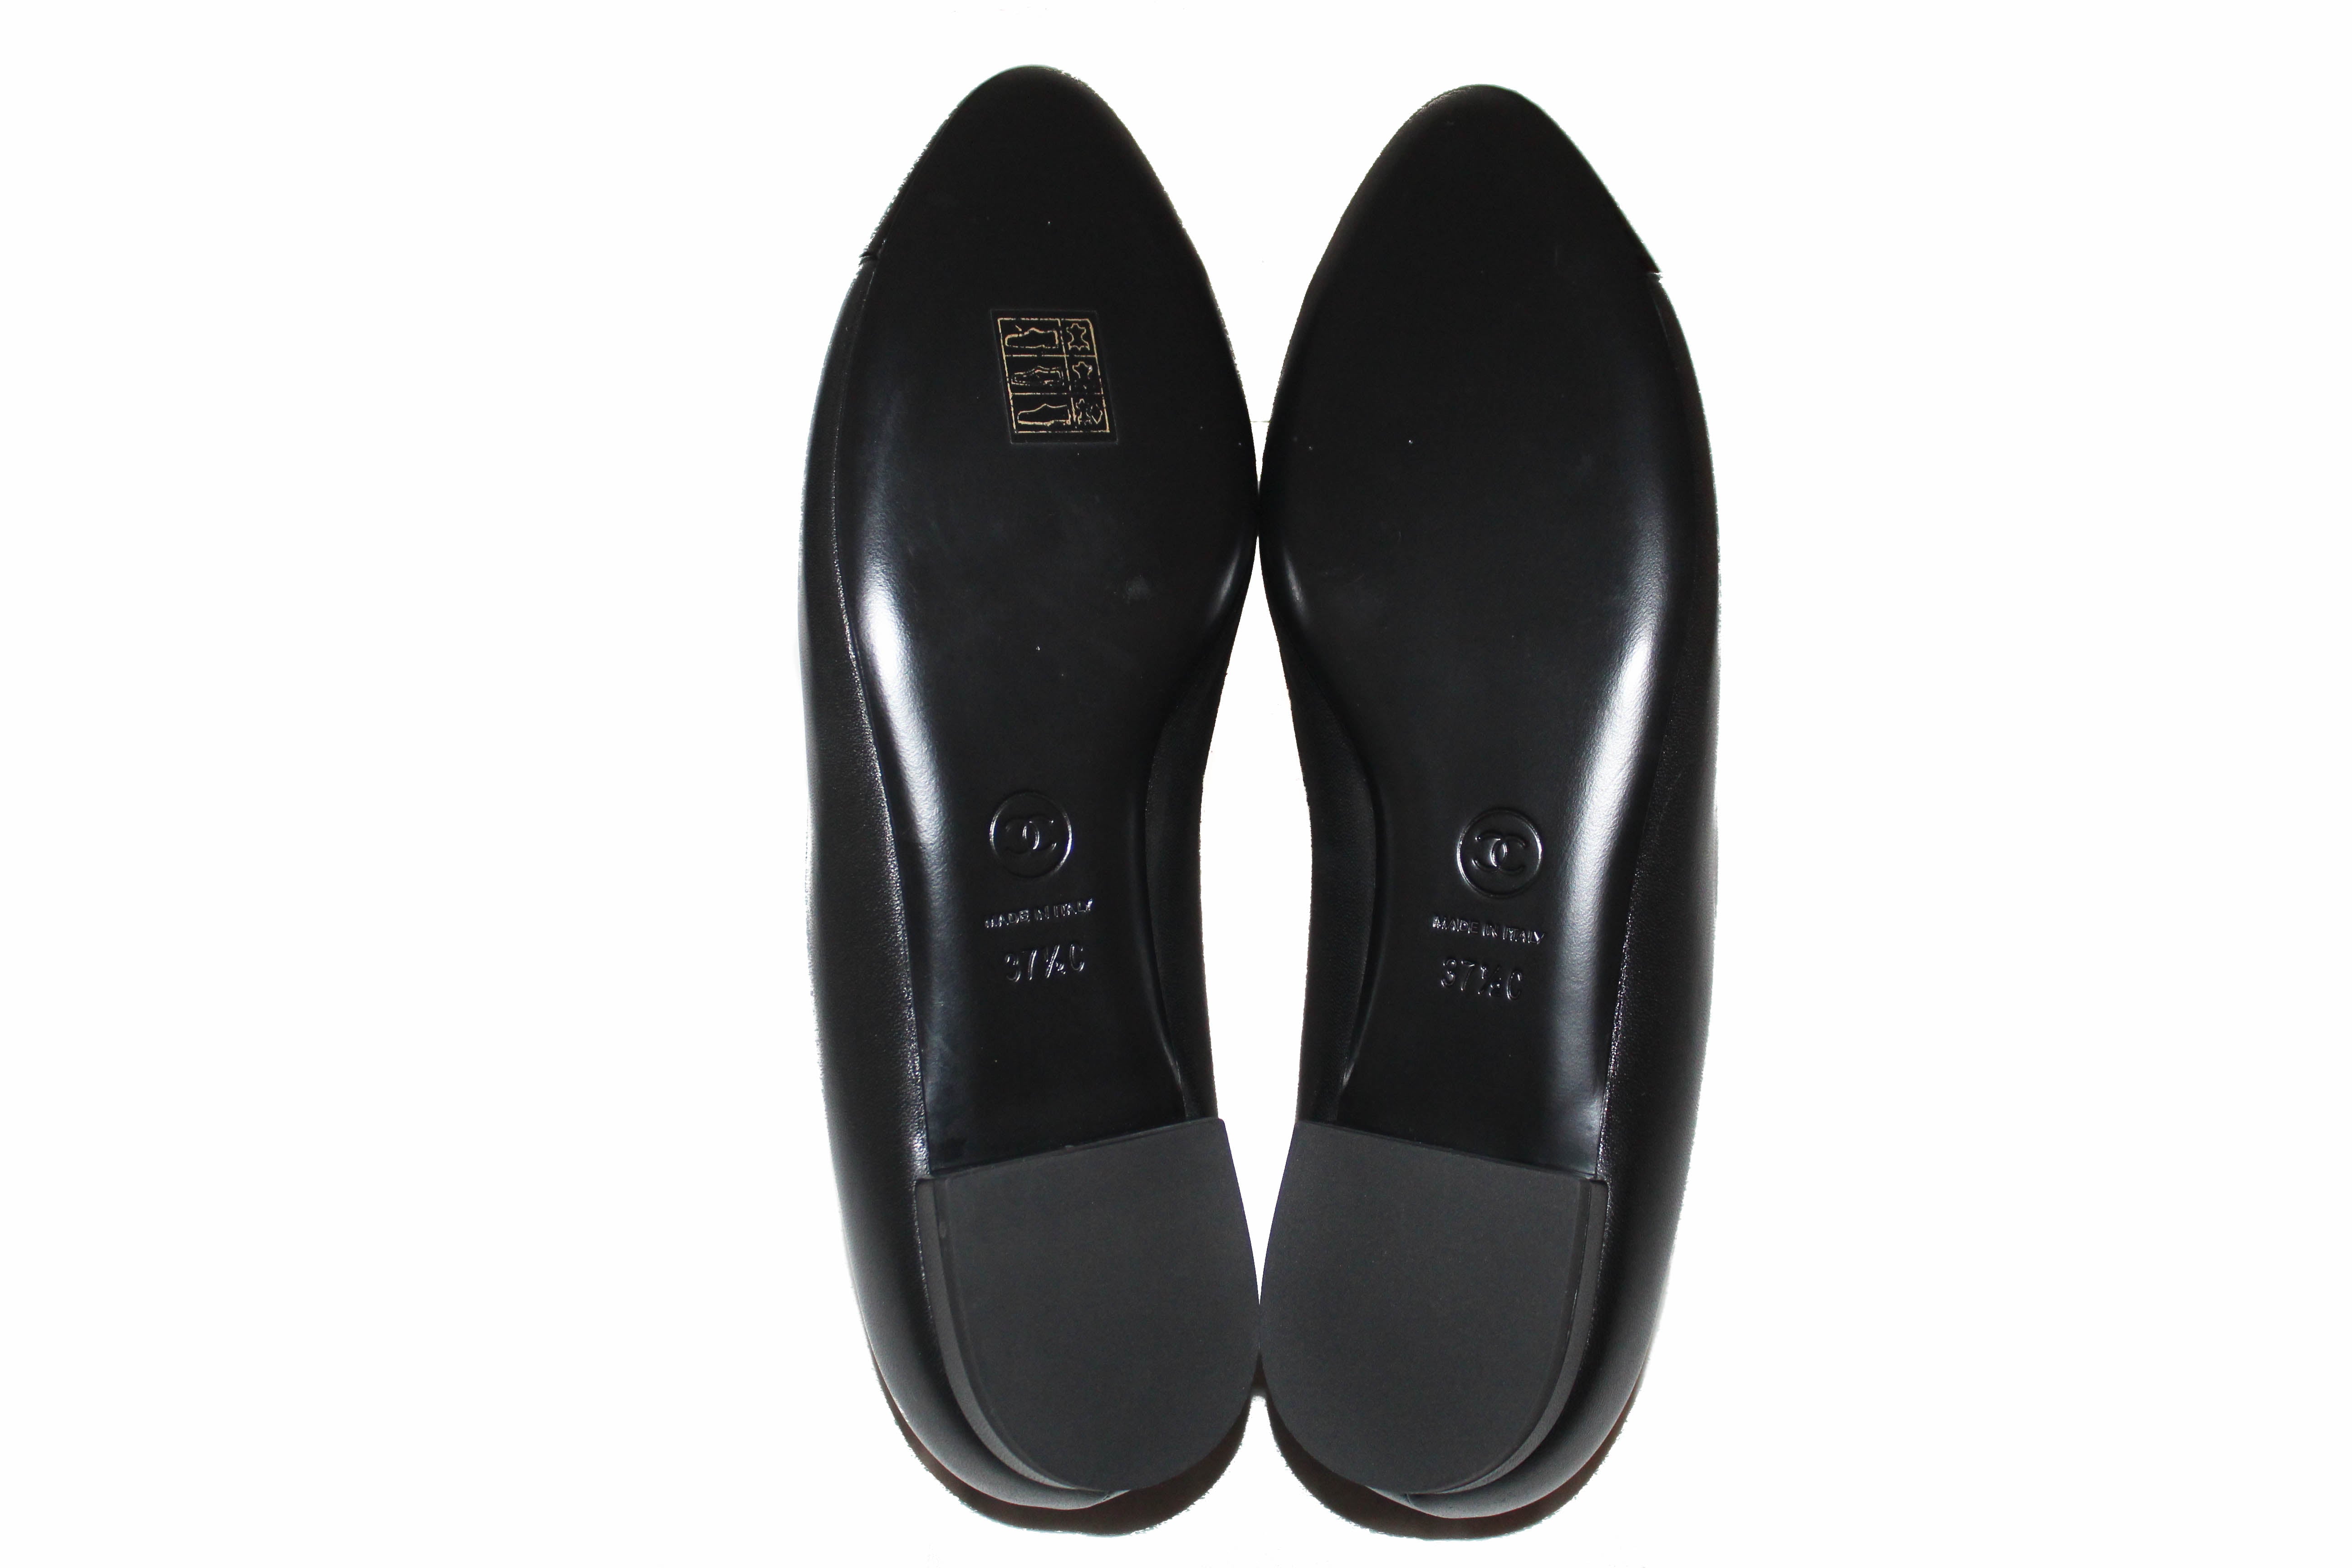 Authentic New Chanel Black Pointed Toe Camelia Flats Size 37.5